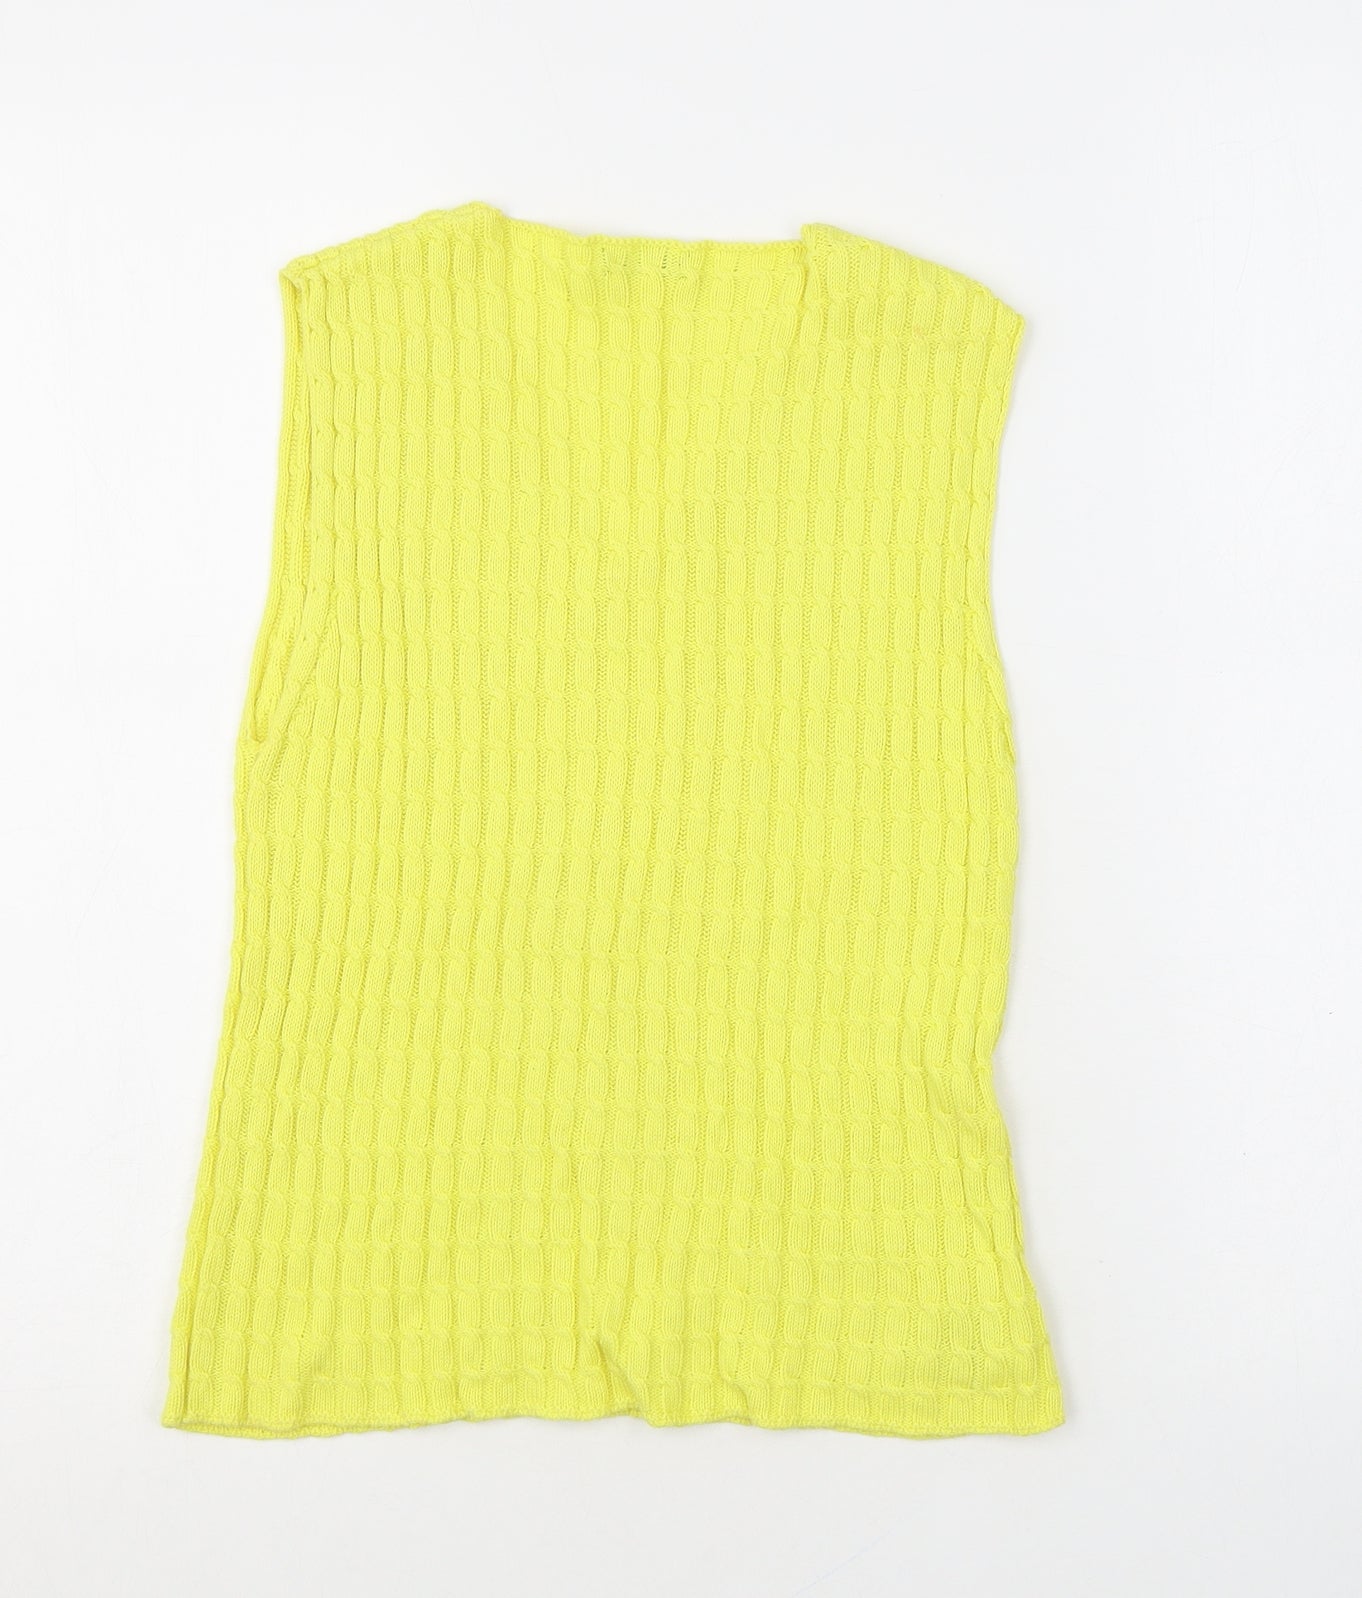 United Colors of Benetton Womens Yellow V-Neck Cotton Vest Jumper Size M Pullover